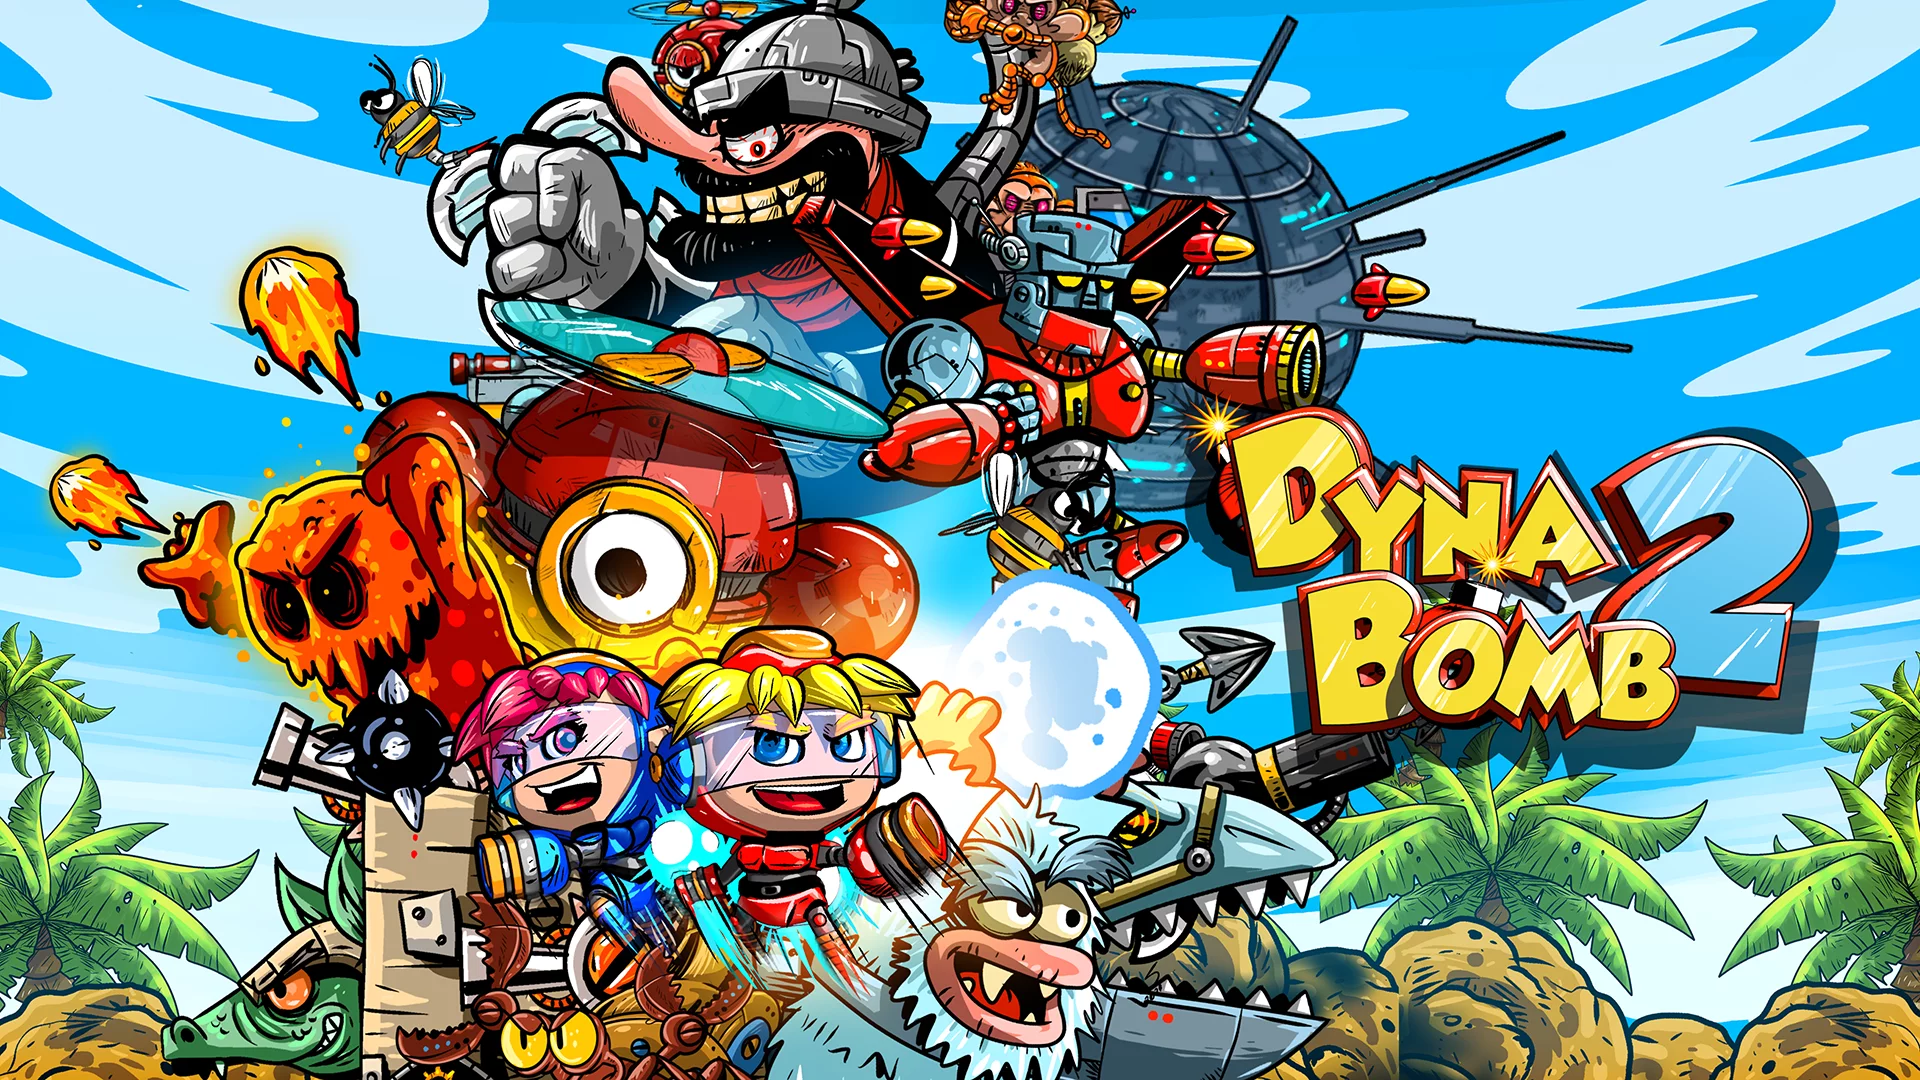 Dyna Bomb 2 player count stats